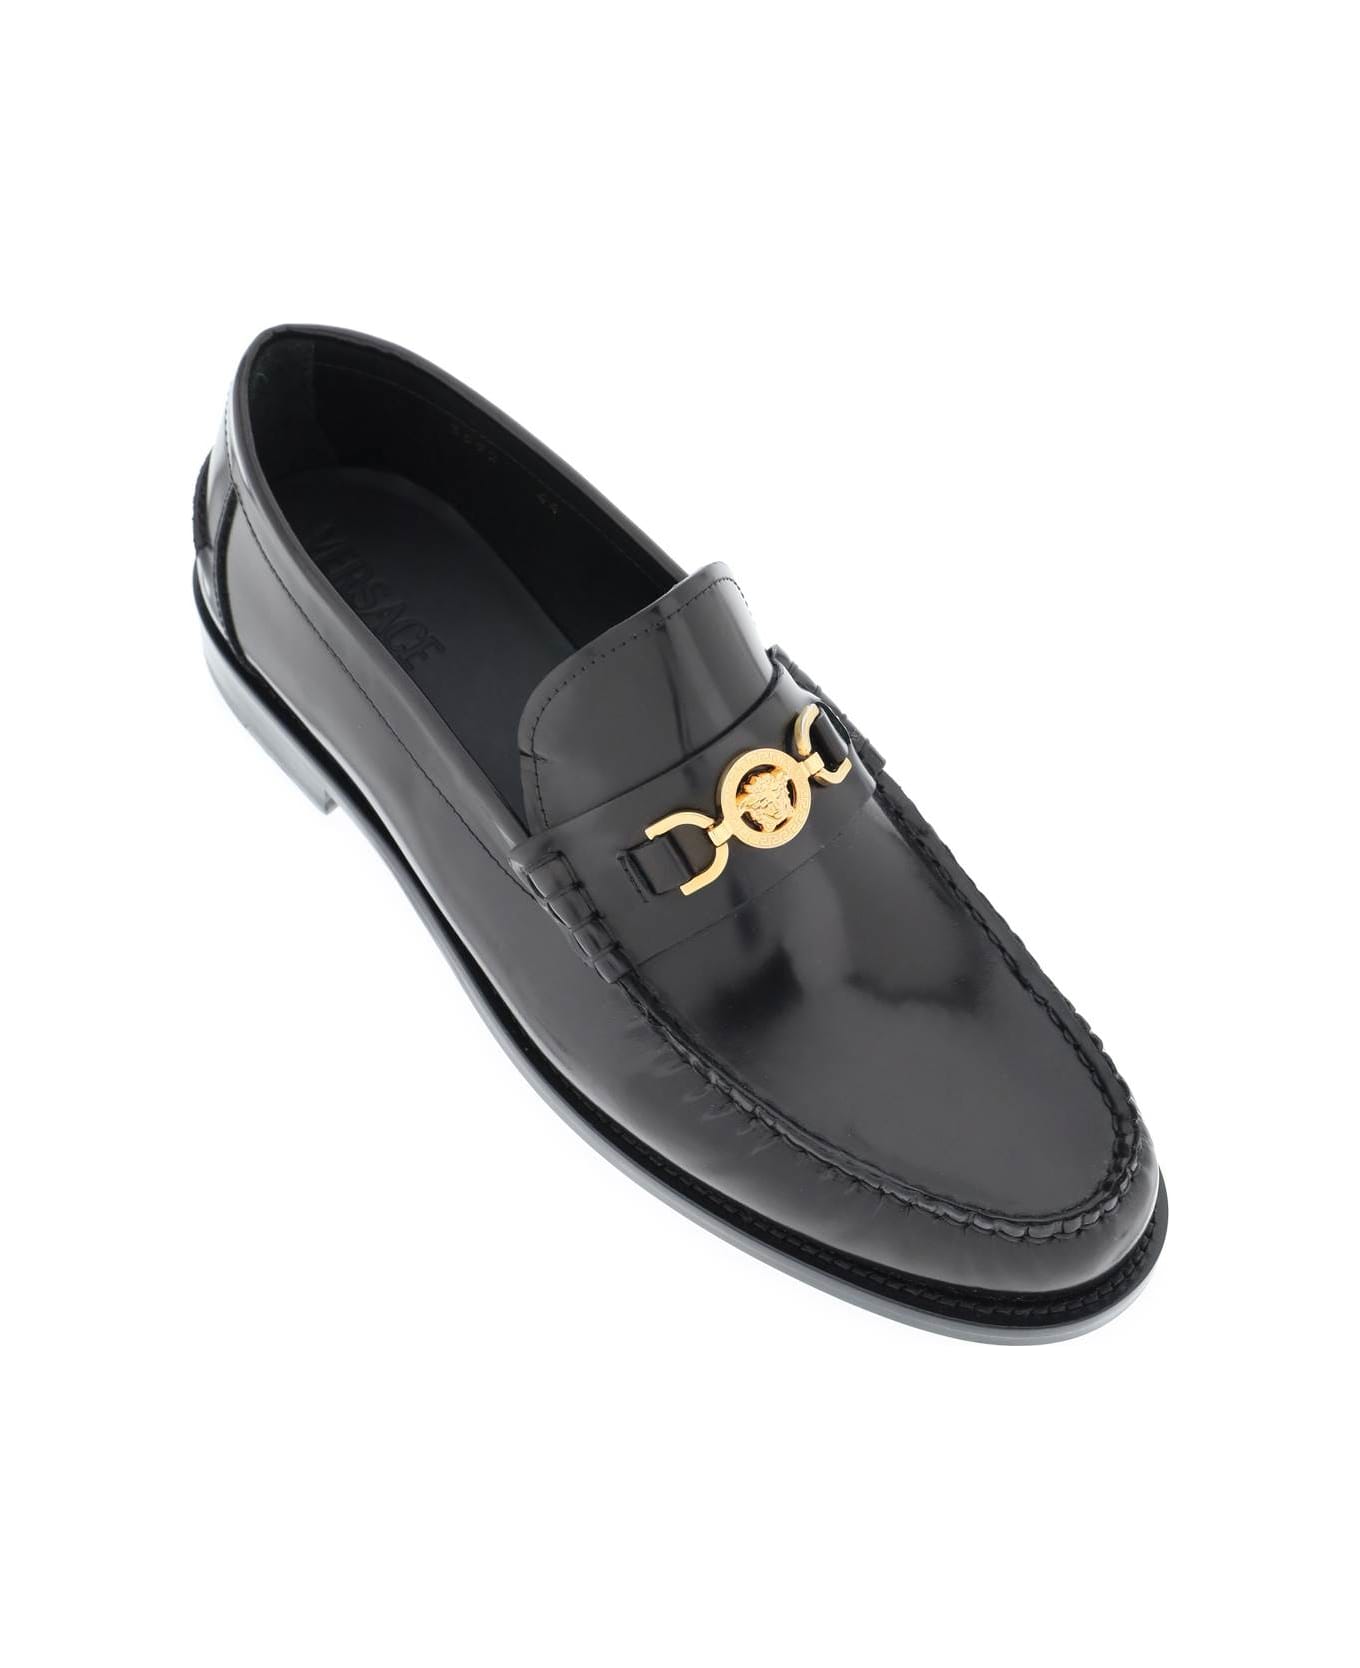 Versace Black Leather Loafers - Black/versace Gold ローファー＆デッキシューズ